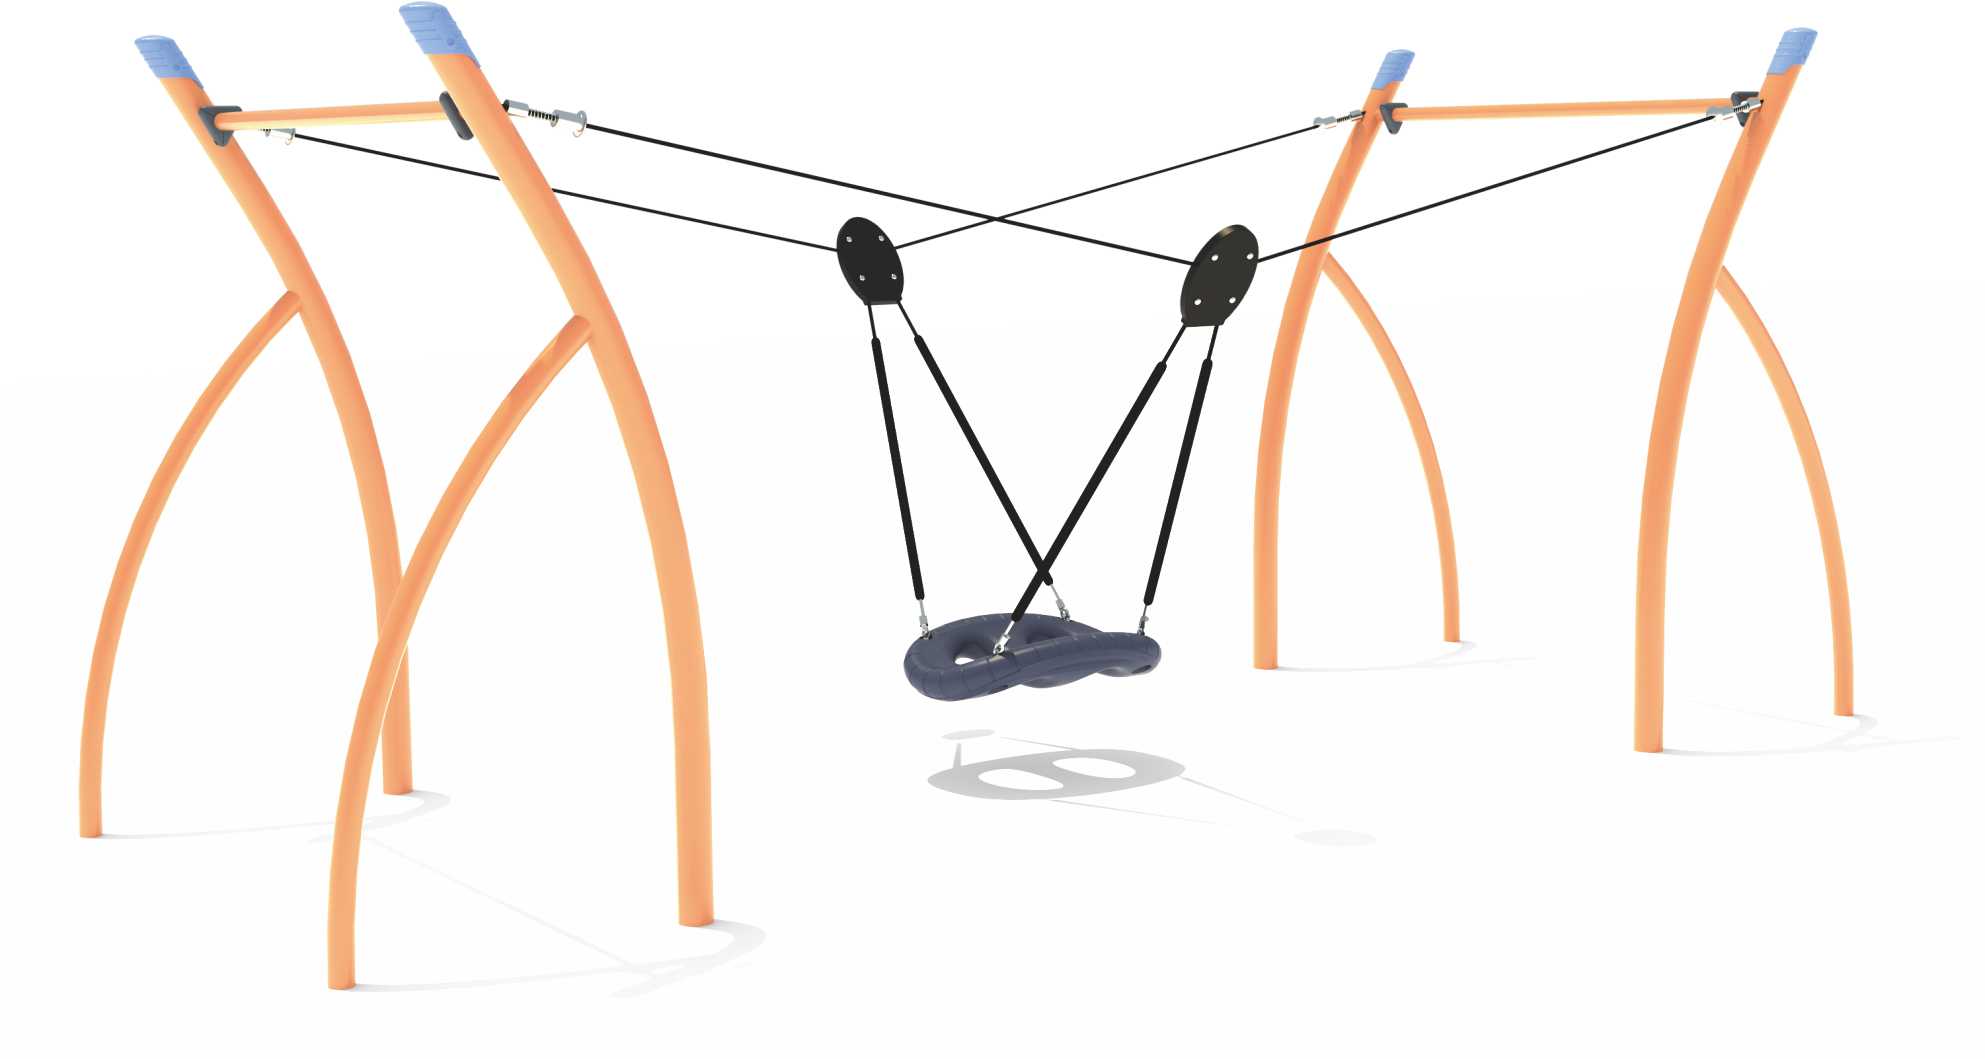 Outdoor Playground Adult Swing Seat 